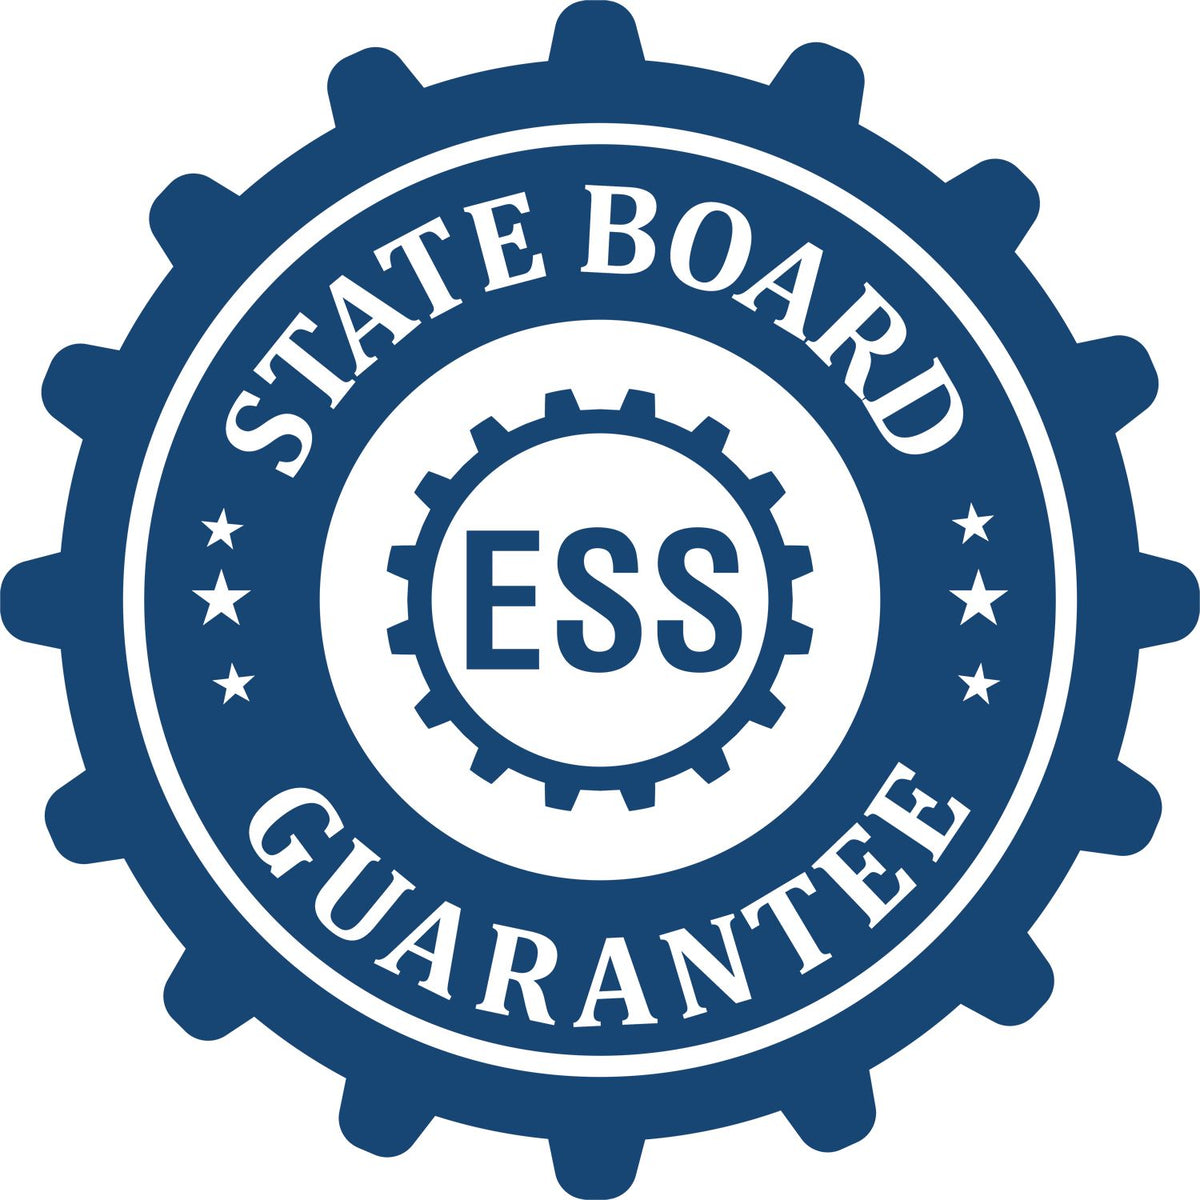 An emblem in a gear shape illustrating a state board guarantee for the Wooden Handle Arizona State Seal Notary Public Stamp product.